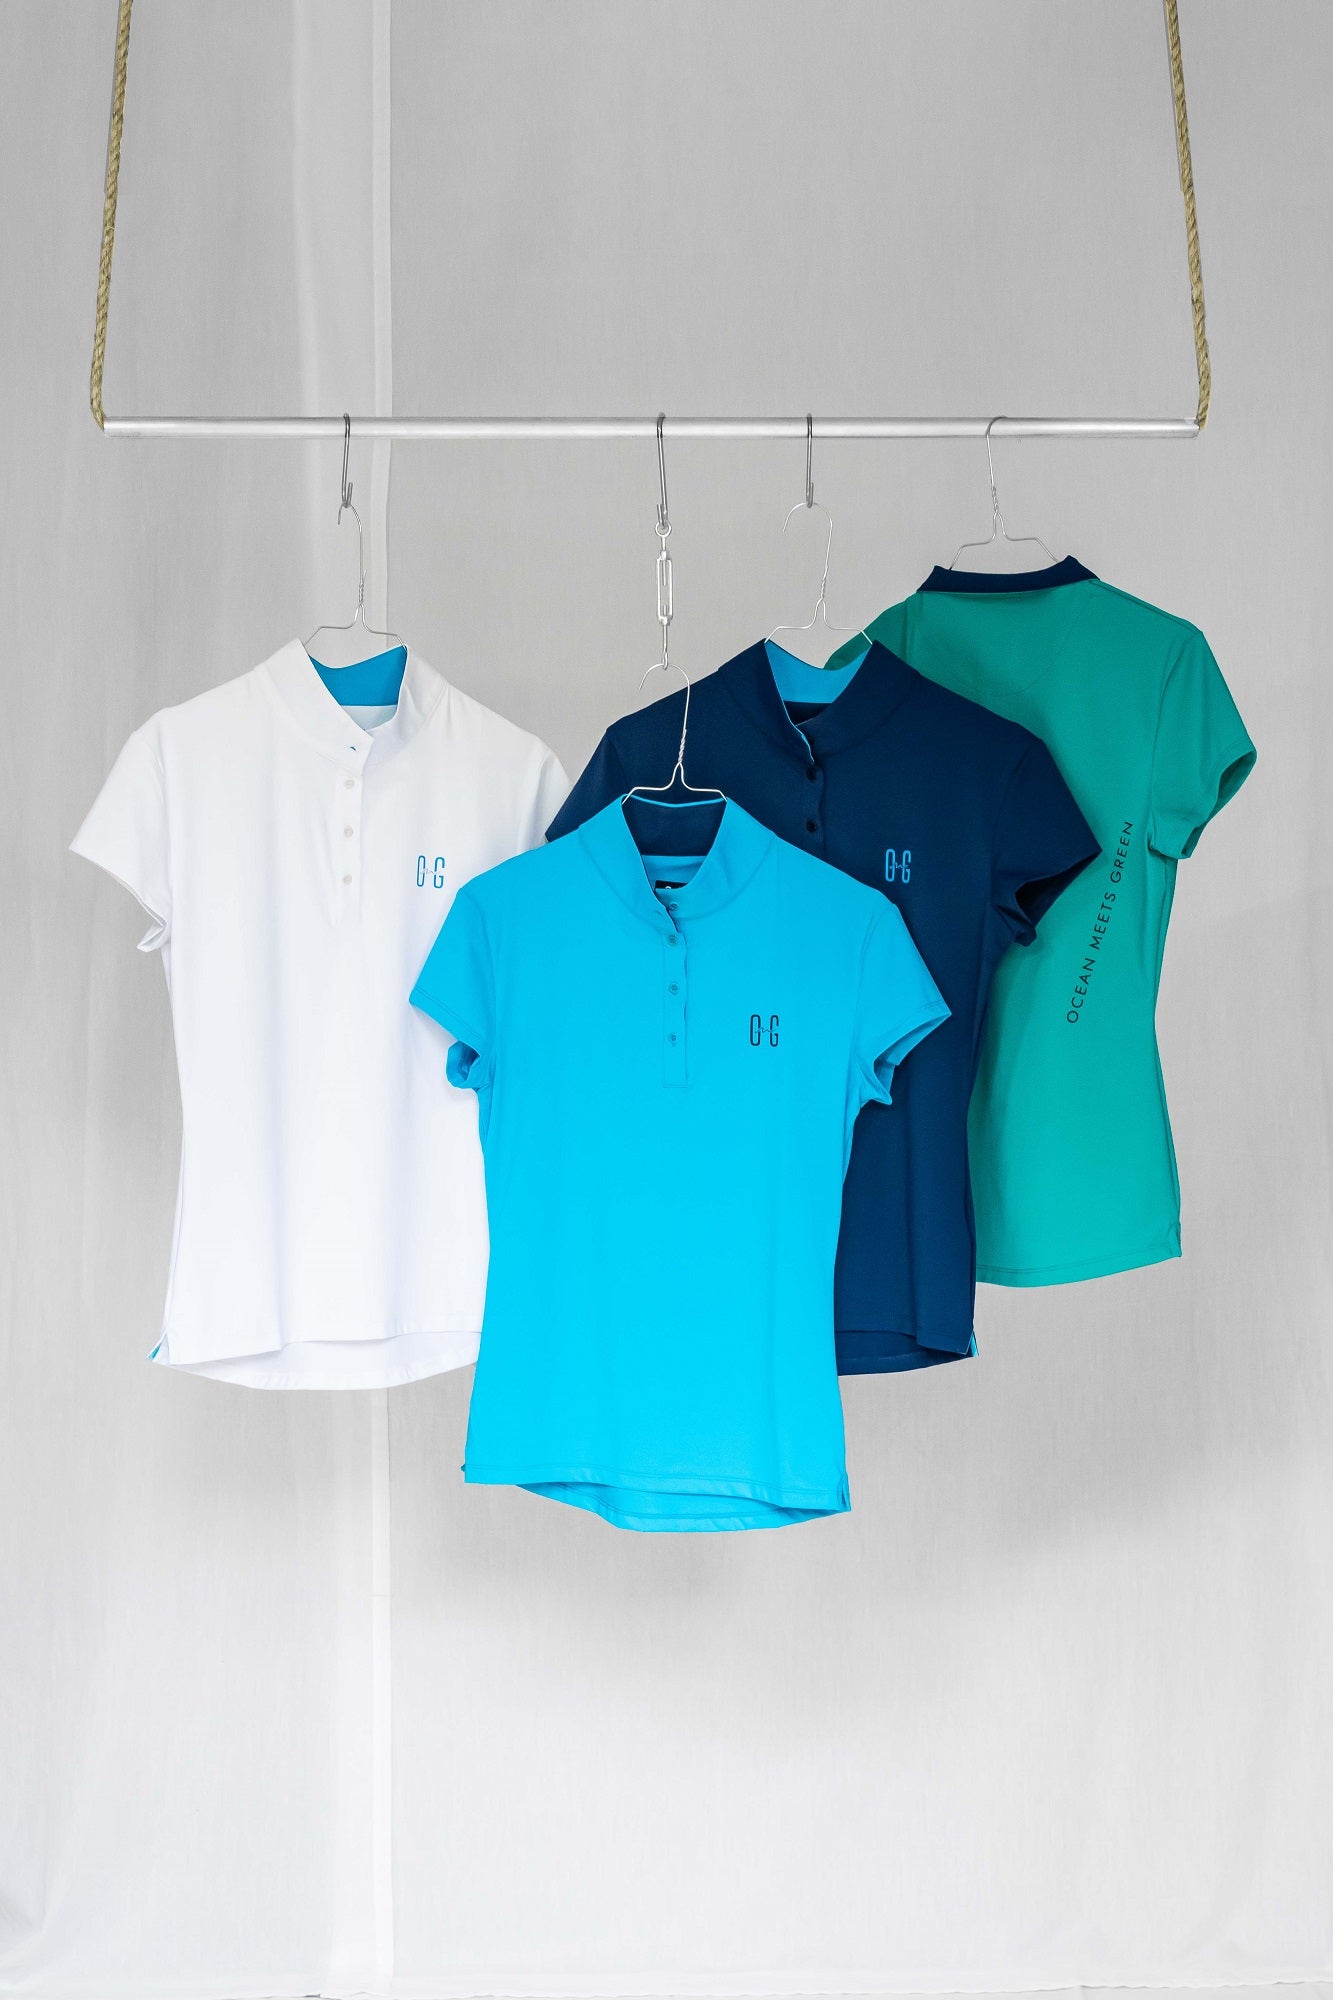 Image of Ocean Meets Green women's golf polos Moana in colors white, light blue, green and navy hangers